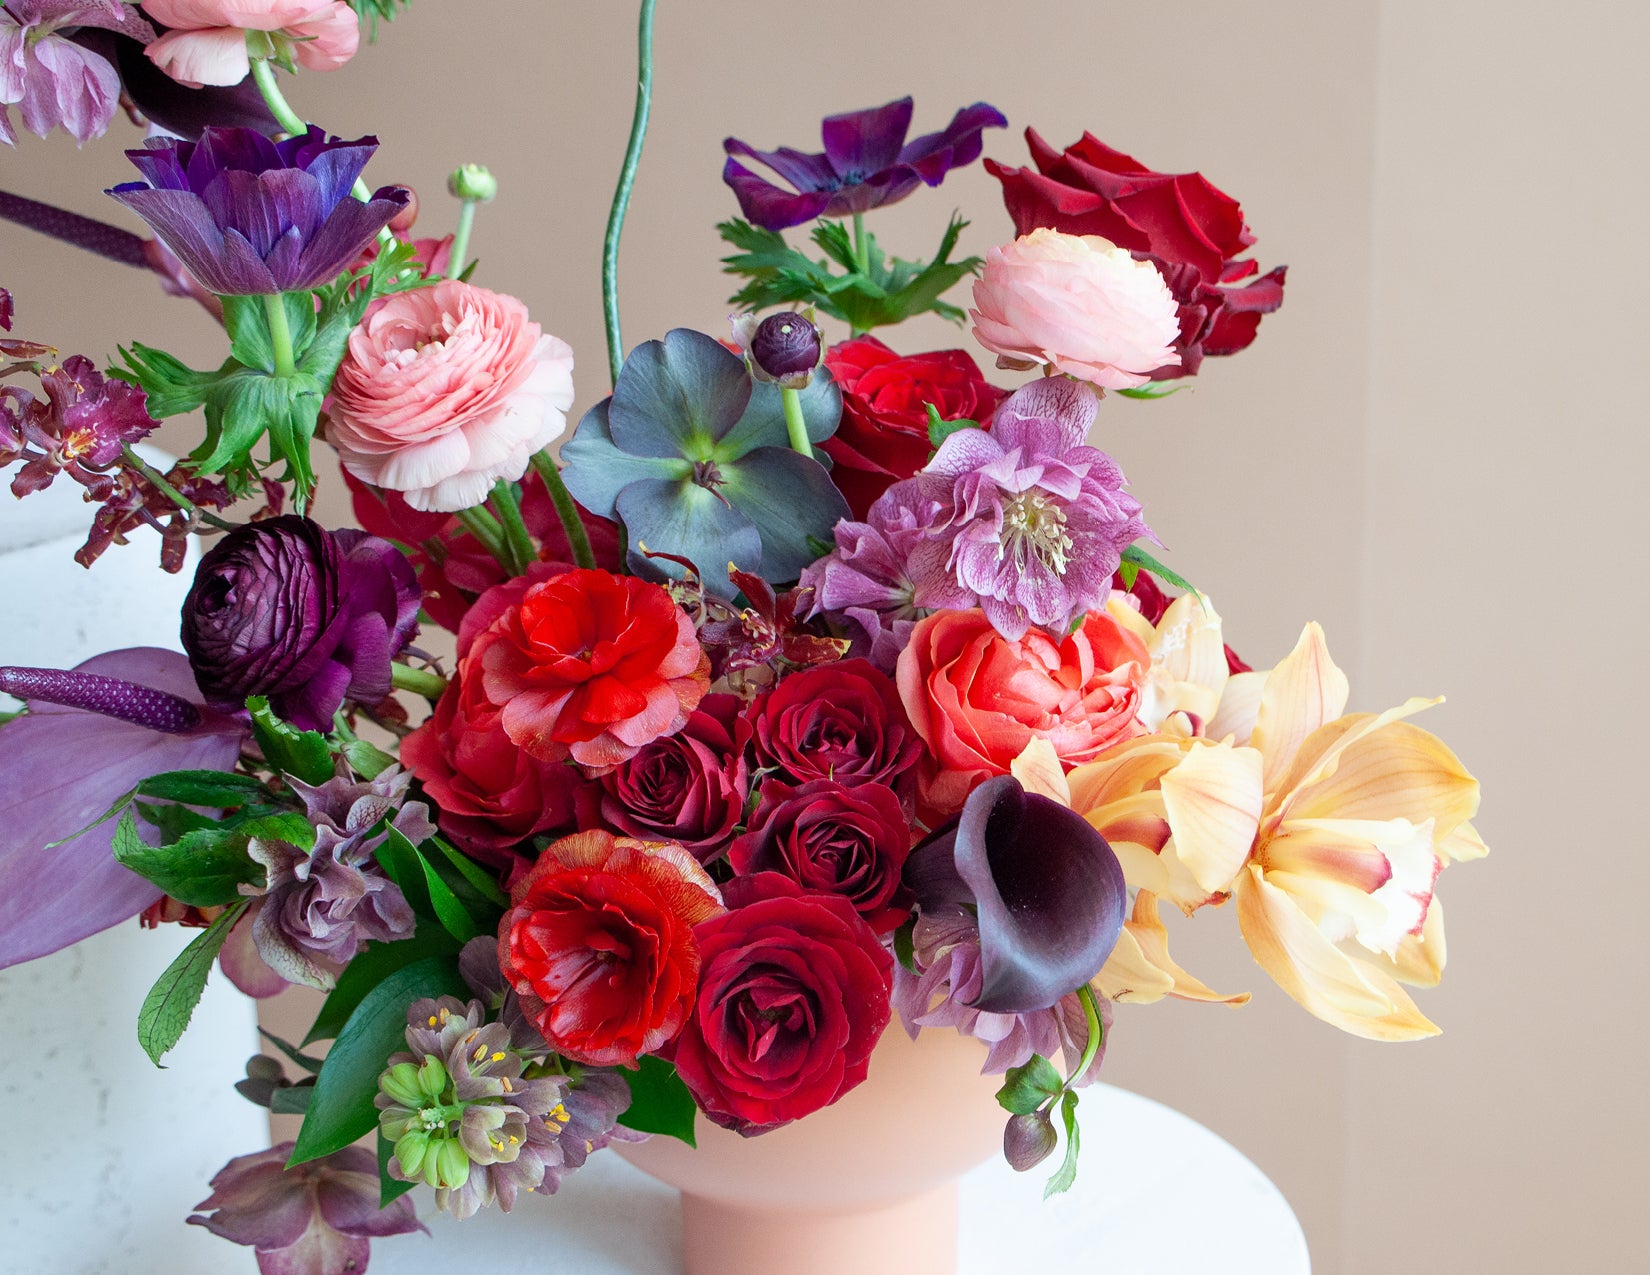 WildFlora blog You Tube Theater Event Flowers Florals Los Angeles Hollywood high end premium rose ranunculus calla lily anthurium hellebore orchid anemone allium red lavender purple violet moody dark peach terracotta vase container